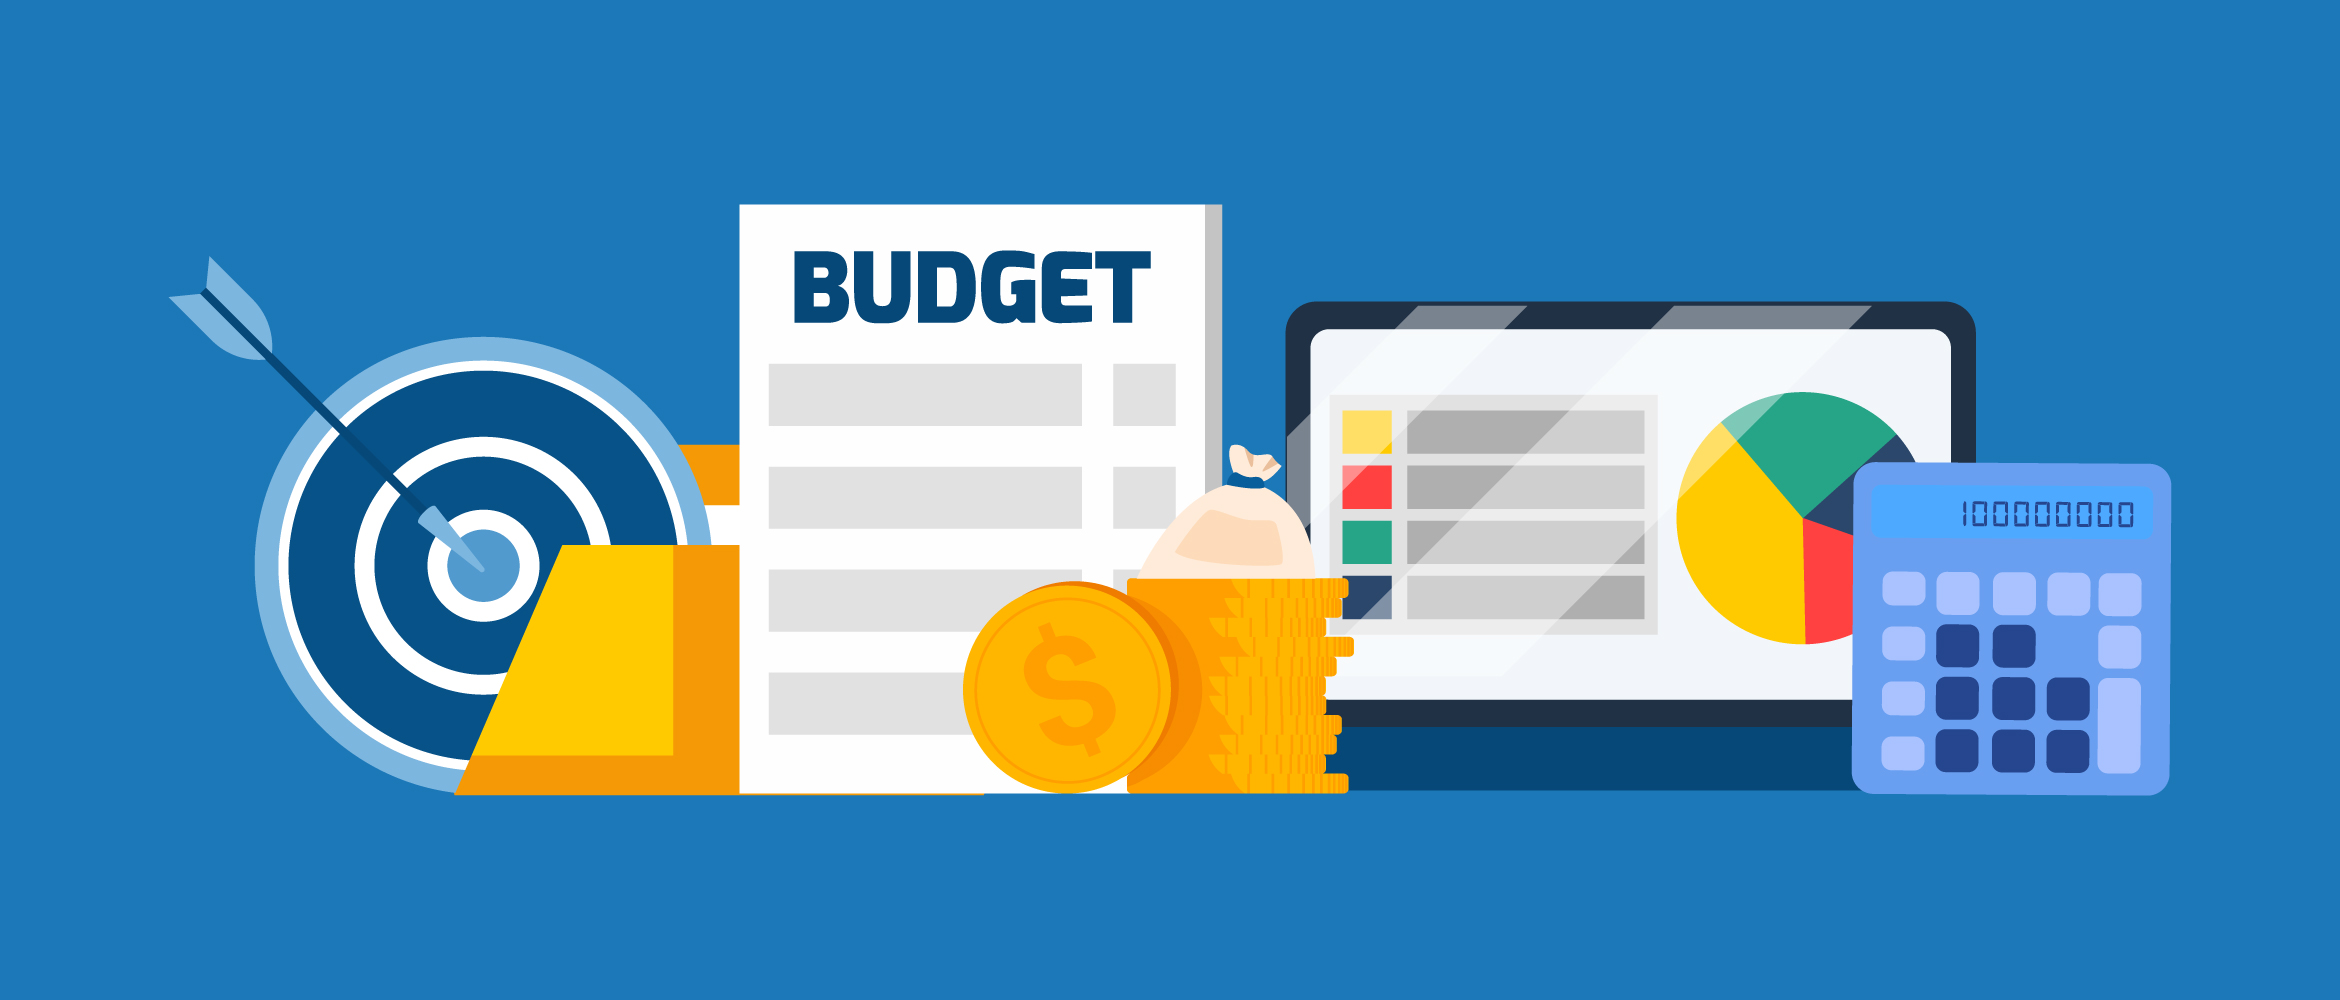 How financial startups use SEO to make their marketing budgets more efficient